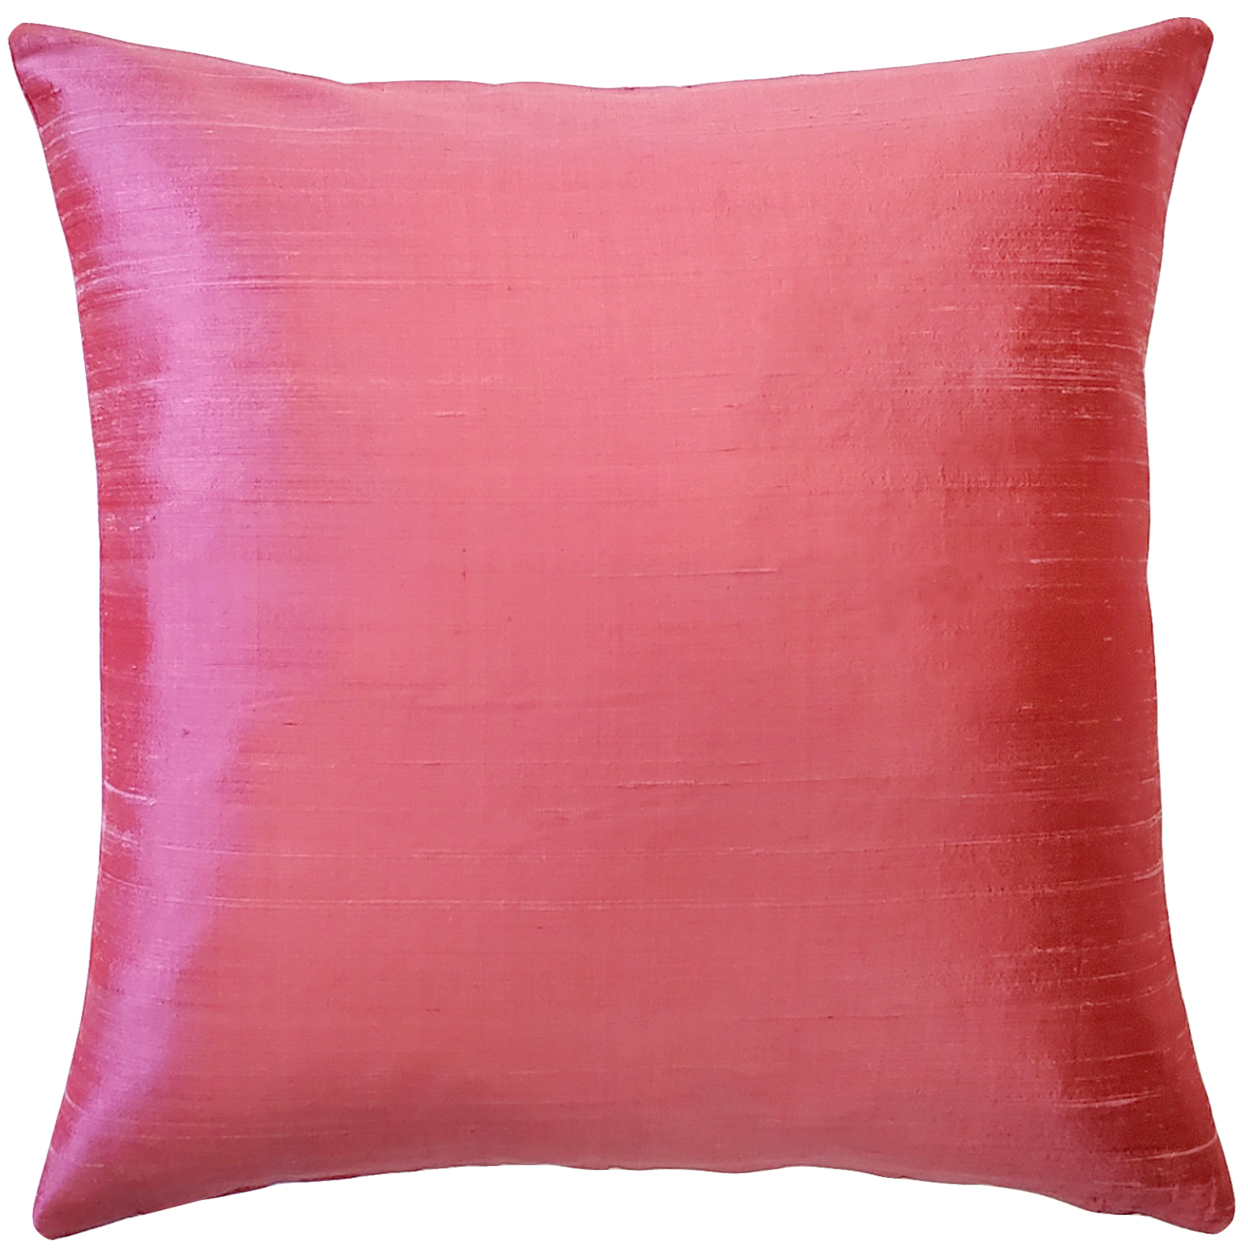 Sankara Rose Blush Silk Throw Pillow 18x18 Inches Square, Complete Pillow With Polyfill Pillow Insert